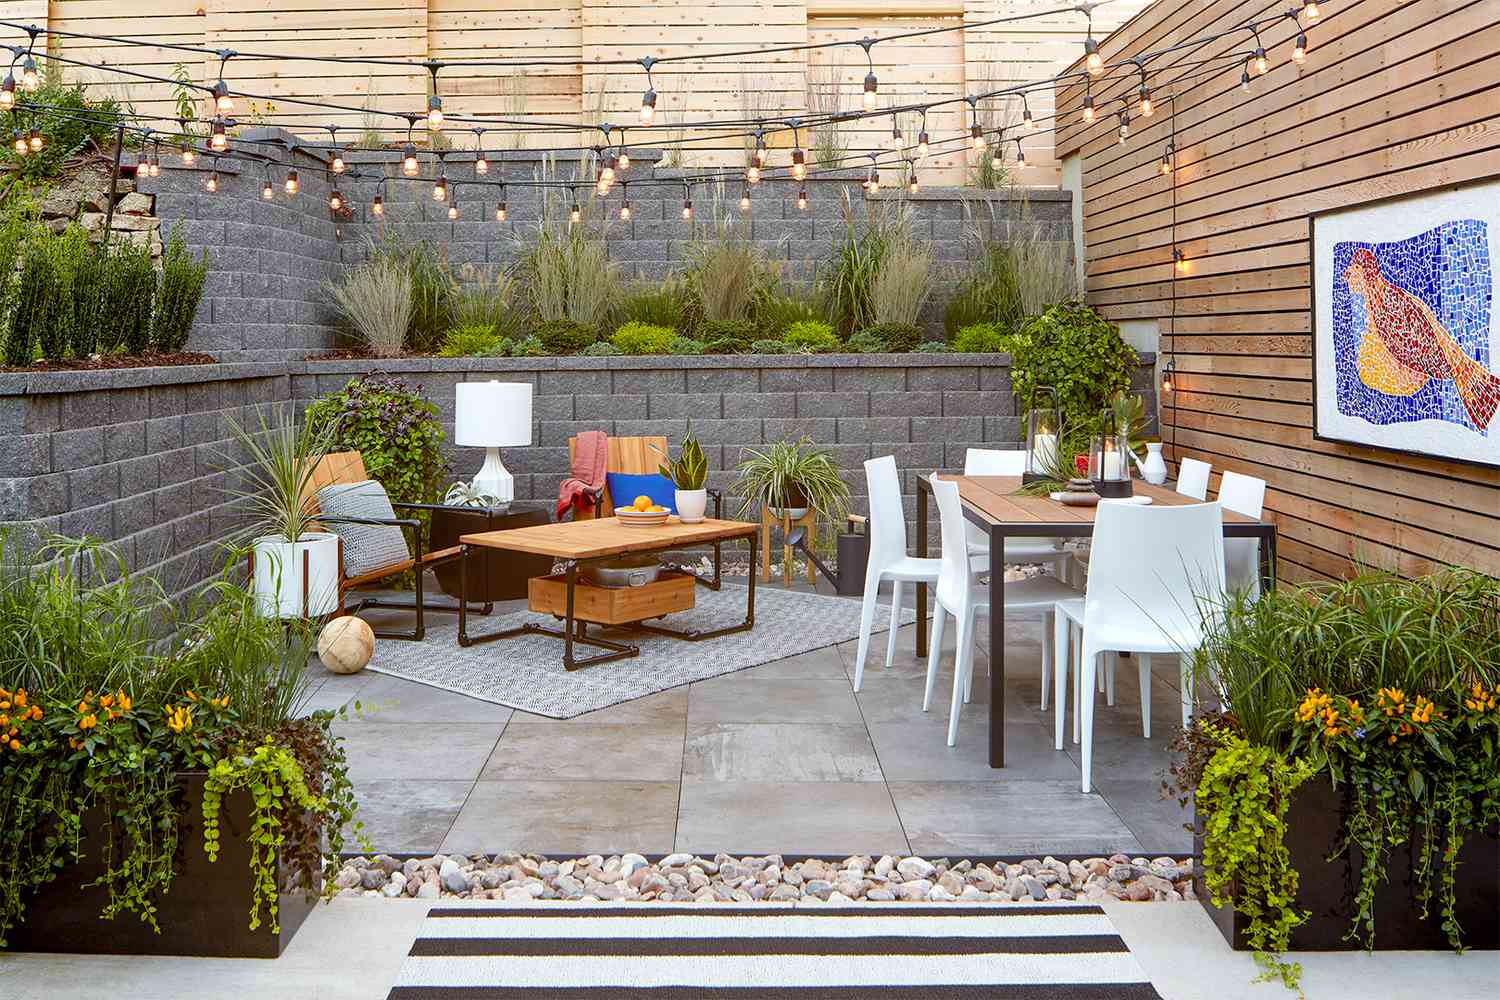 Outdoor String Lights In Your Backyard, How To Hang Patio Lights On Brick Wall